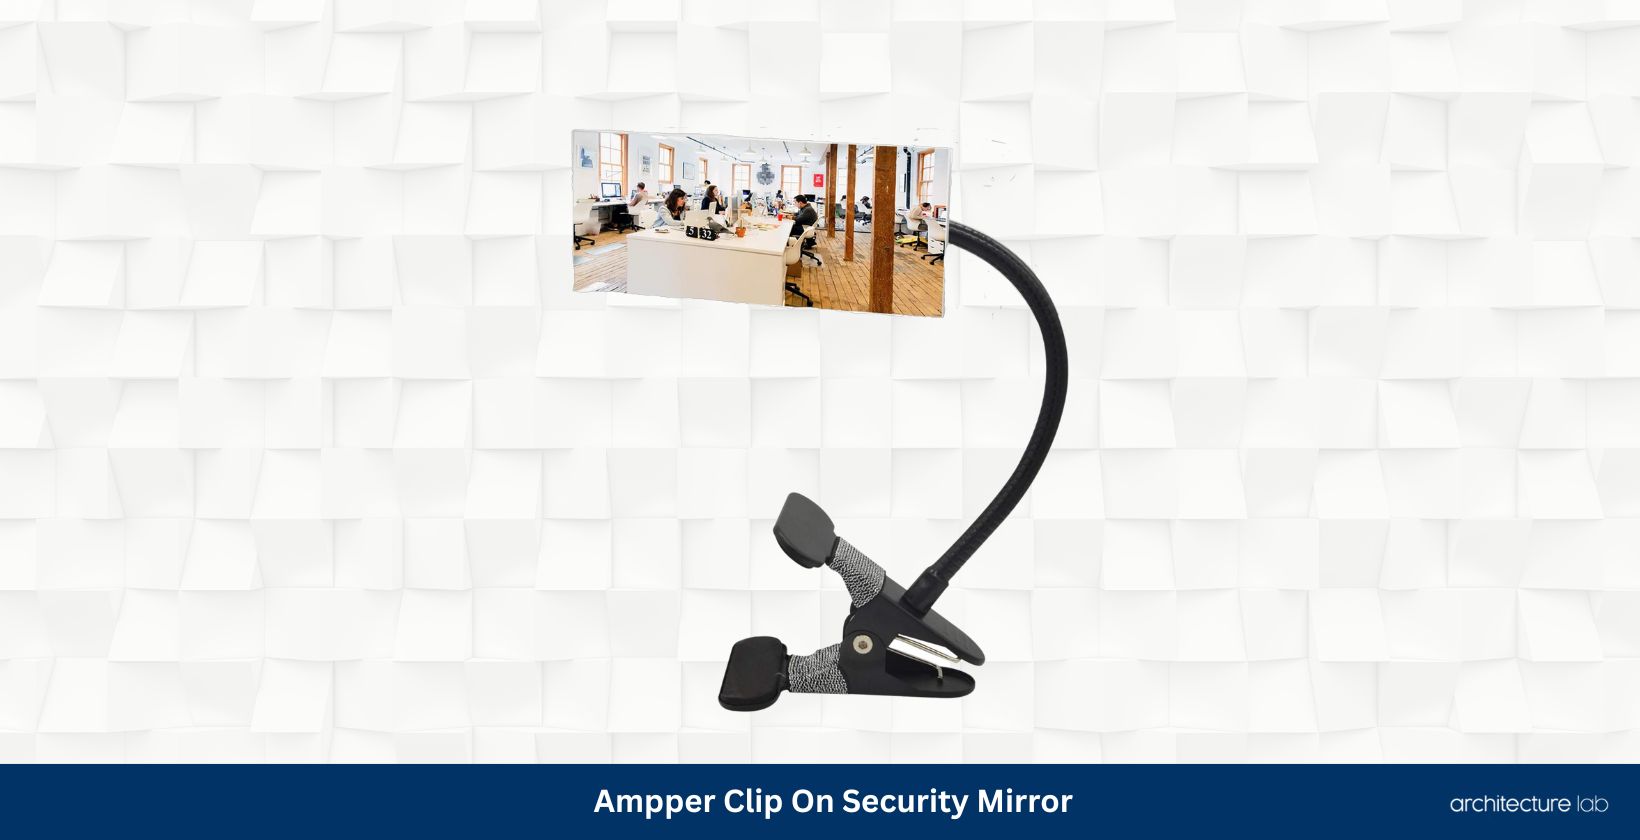 Ampper clip on security mirror